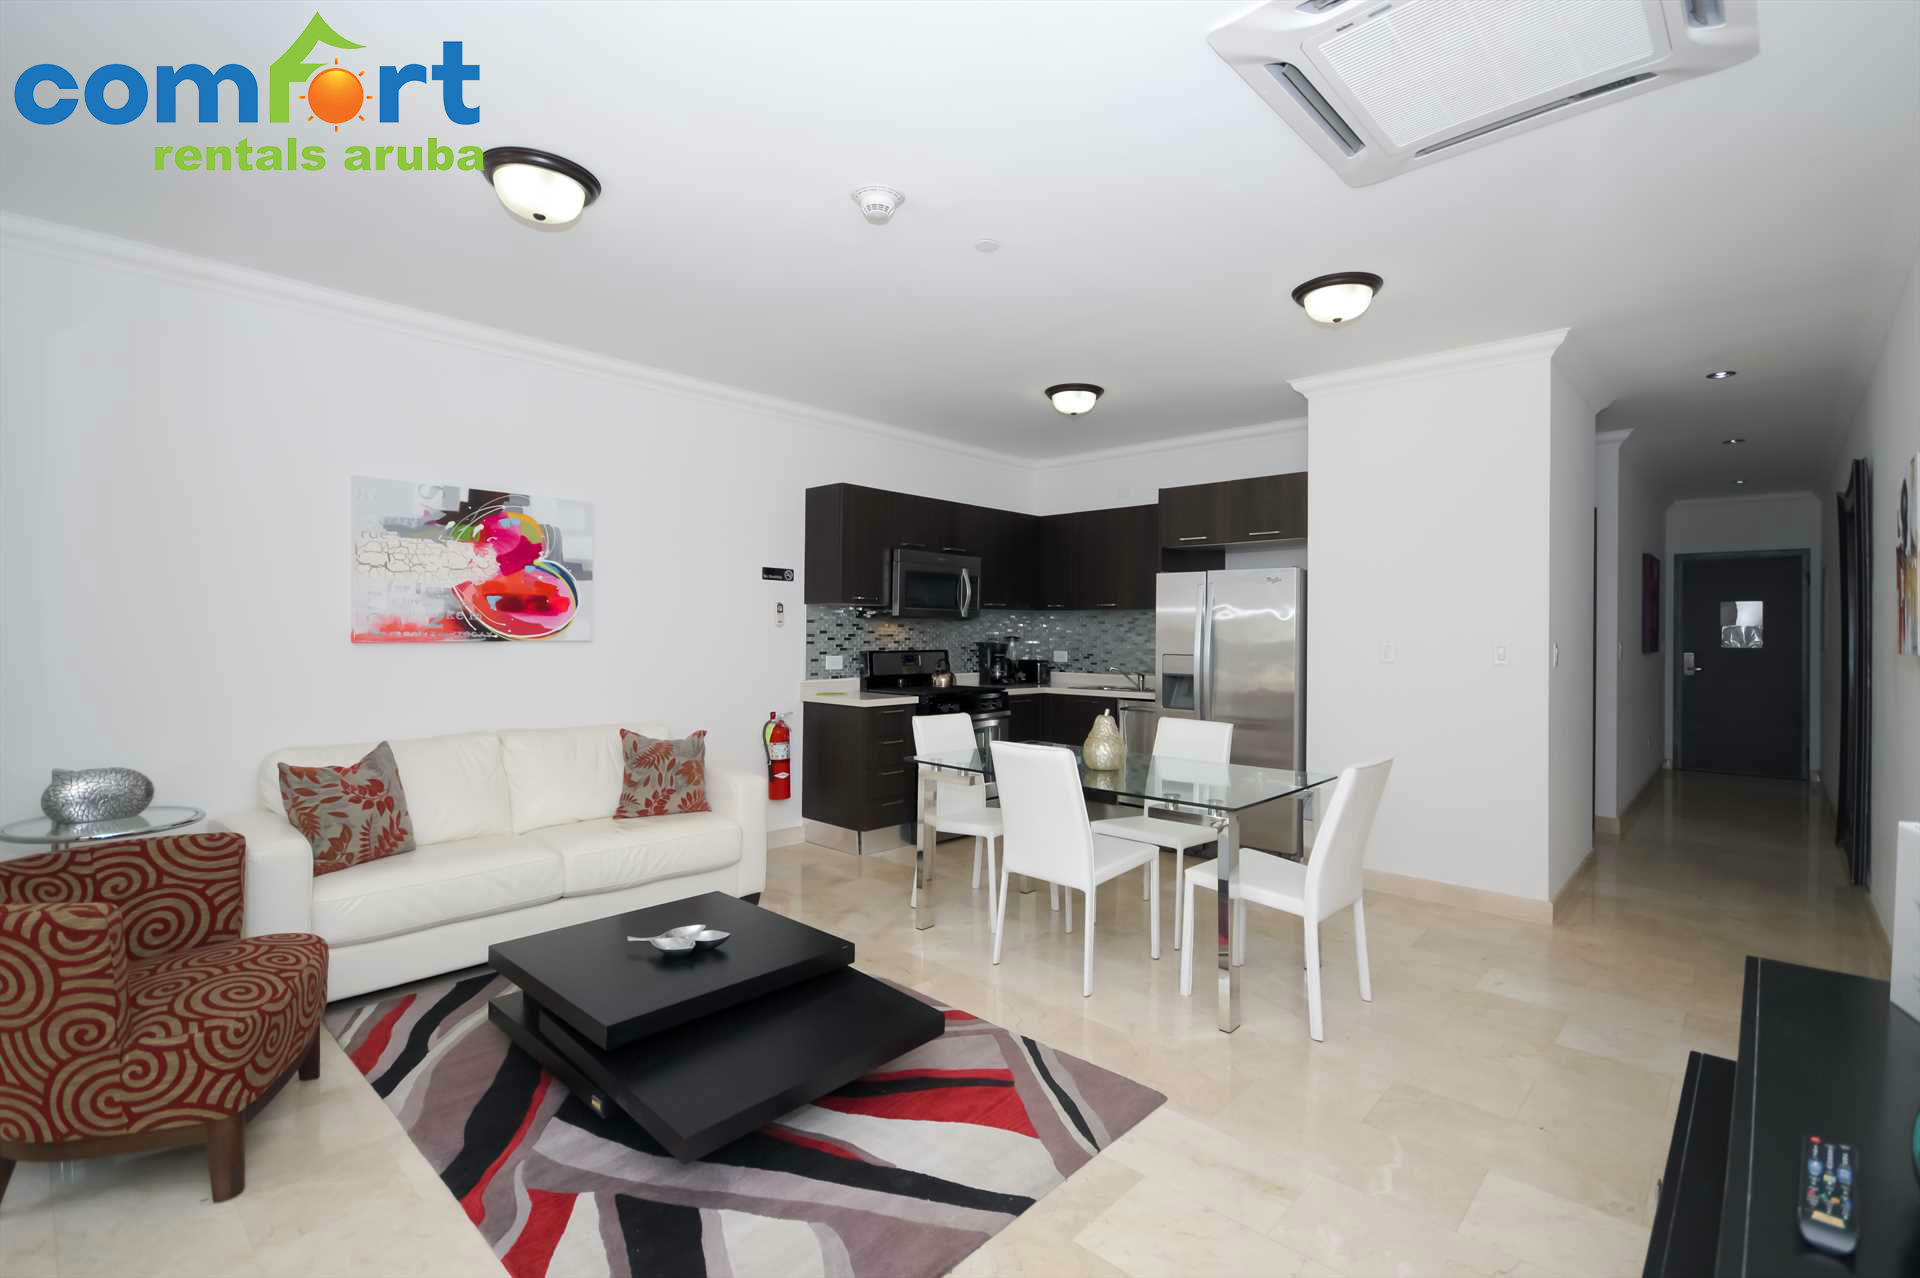 The condo features an open plan living area that will make you feel right at home